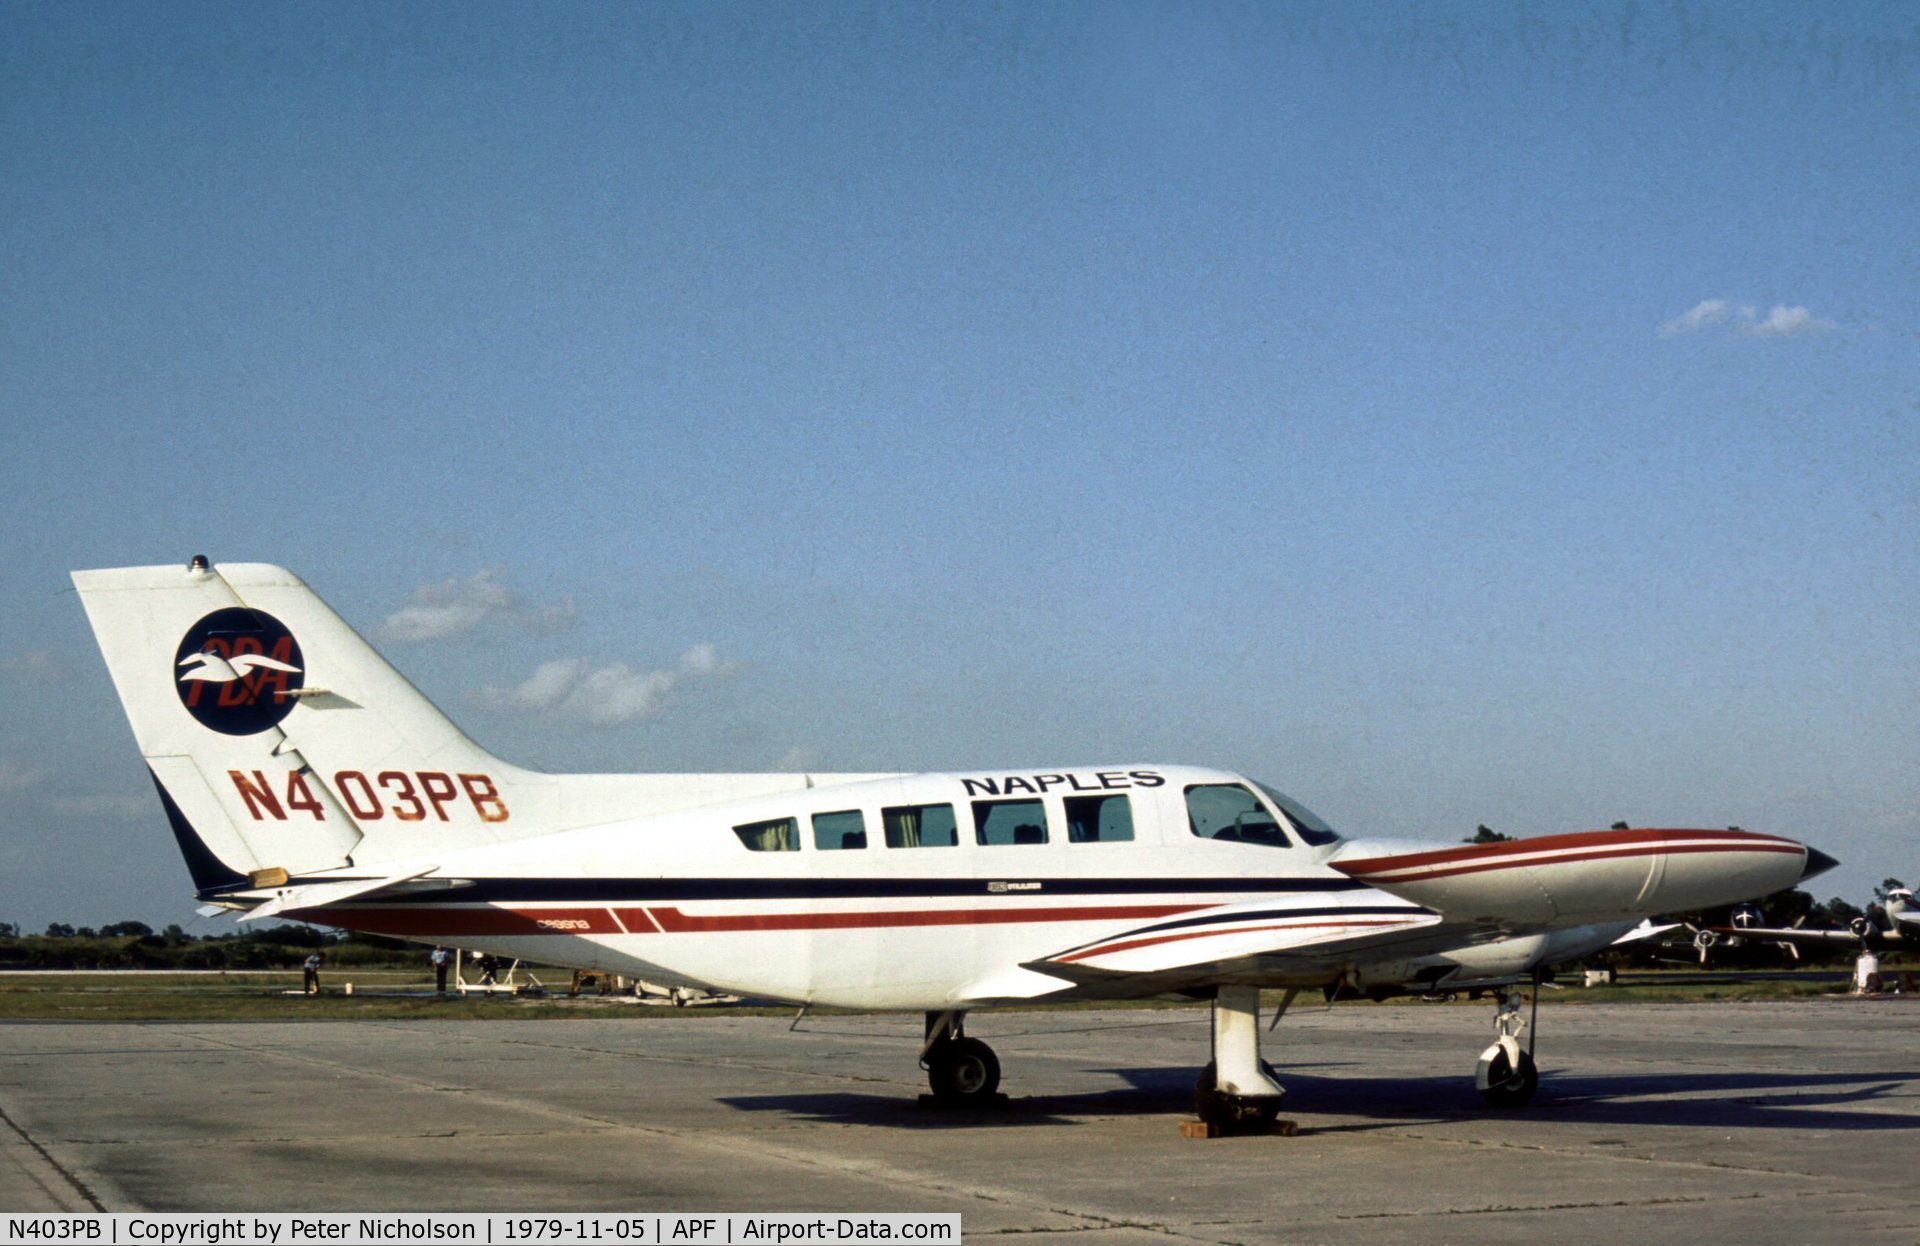 N403PB, 1976 Cessna 402B C/N 402B-1217, Cessna 402B Businessliner of Naples Airlines division of Provincetown-Boston Airlines as seen at Naples in November 1979.